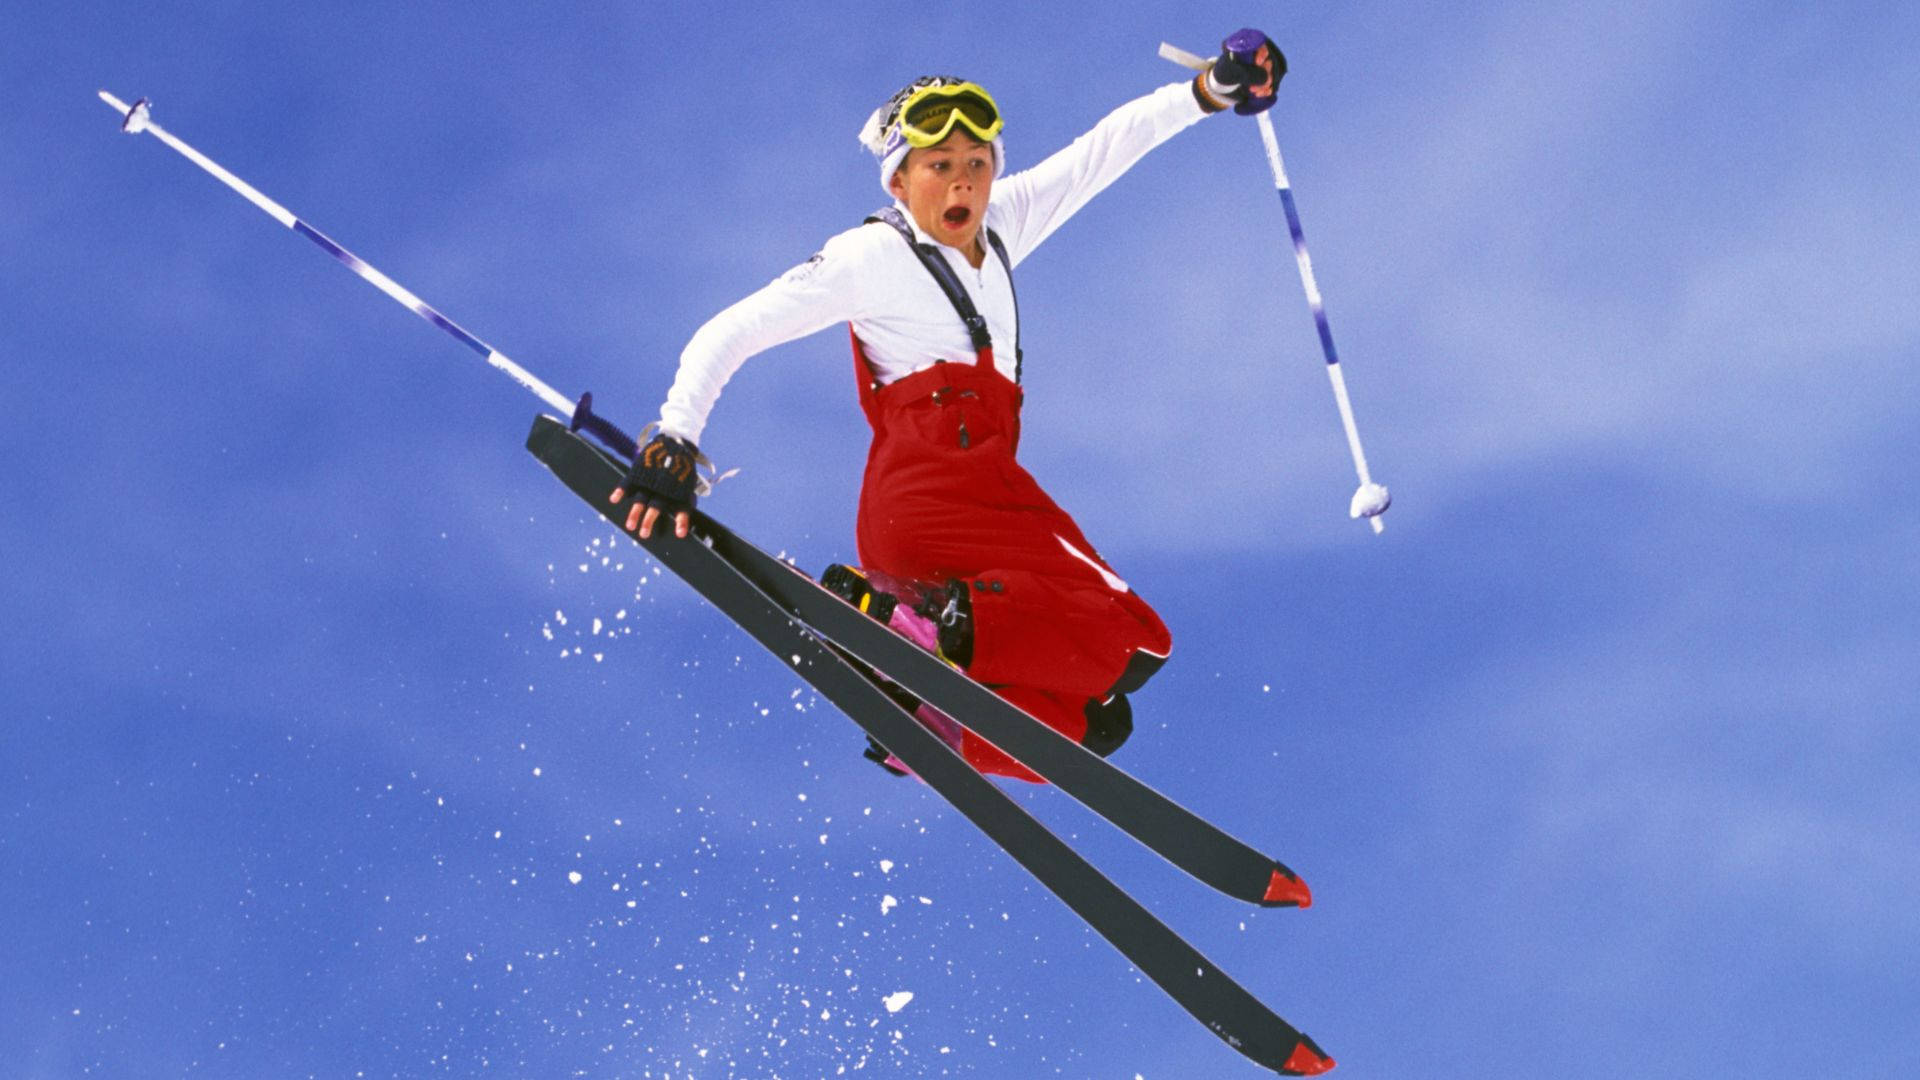 Hilarious Person Ski Jumping Background